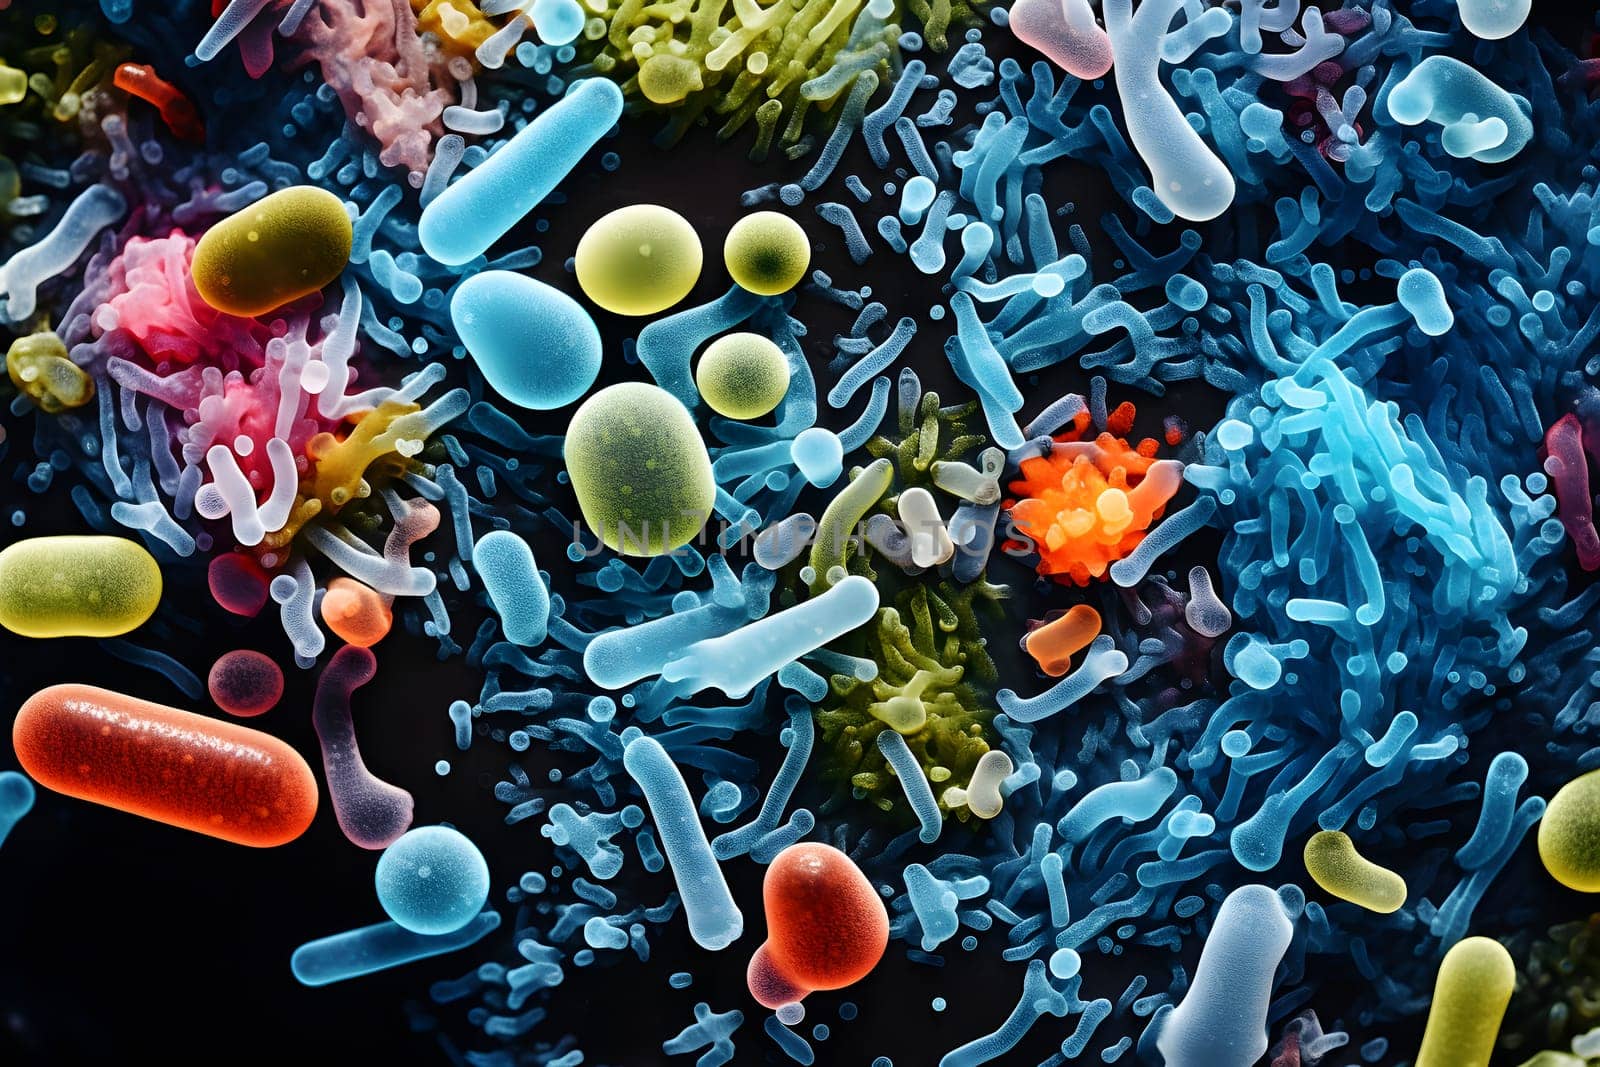 cells, bacteria and microorganisms magnified under a microscope by audiznam2609